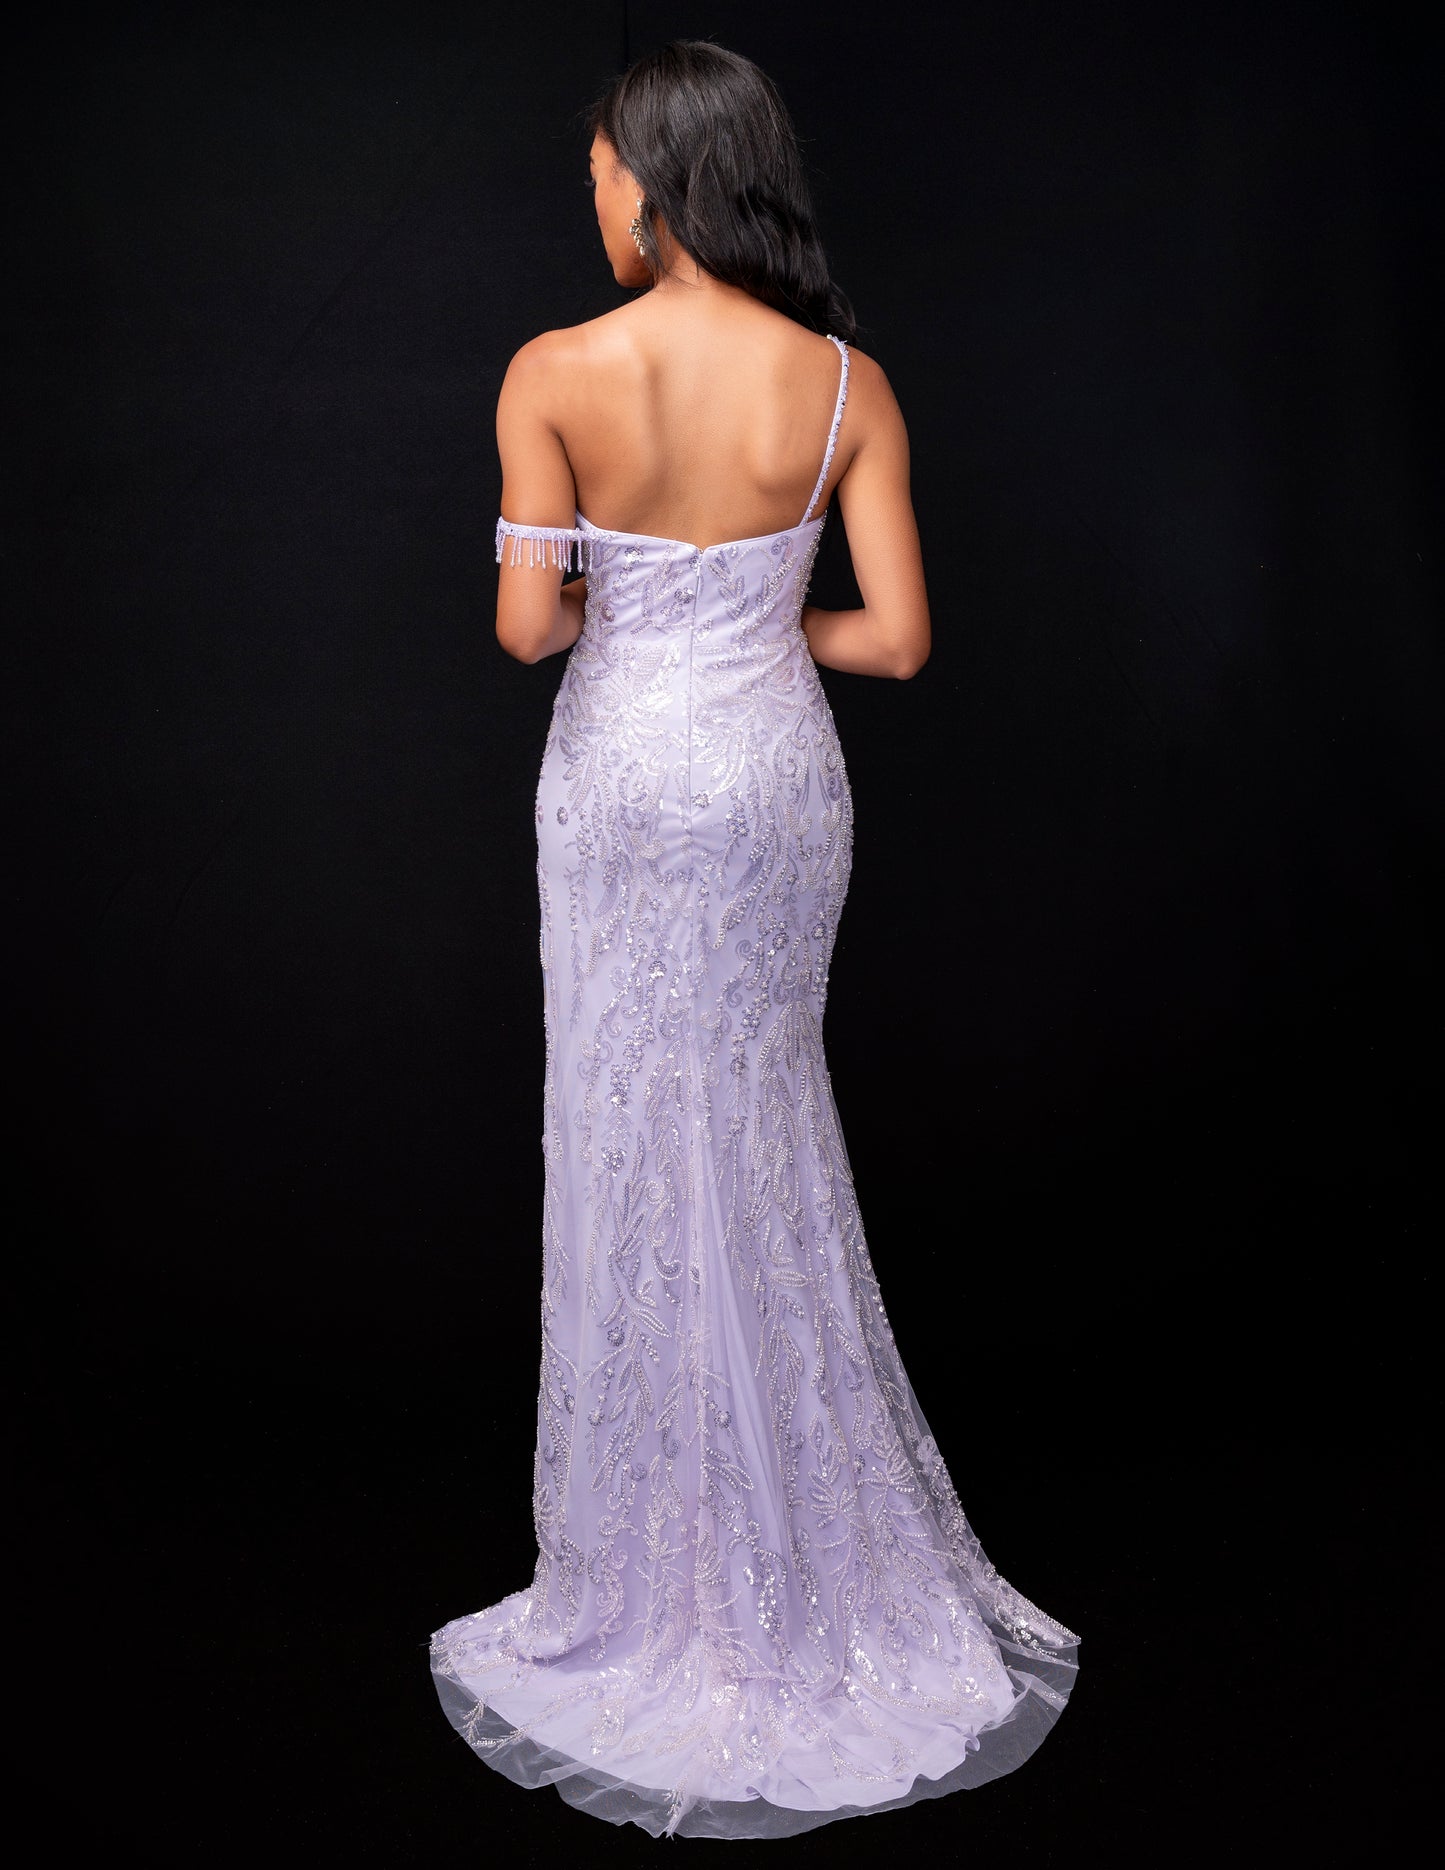 <p data-mce-fragment="1">Effortlessly stun in the Nina Canacci 9160 evening gown. This one-shoulder dress features a sheer sequin design, with a beaded fringe slit for added elegance. The off-the-shoulder style adds a touch of sophistication to this formal dress. Perfect for any special occasion, this dress is sure to make a statement.</p> <p data-mce-fragment="1">Sizes: 2-14</p> <p data-mce-fragment="1">Colors: Purple</p>